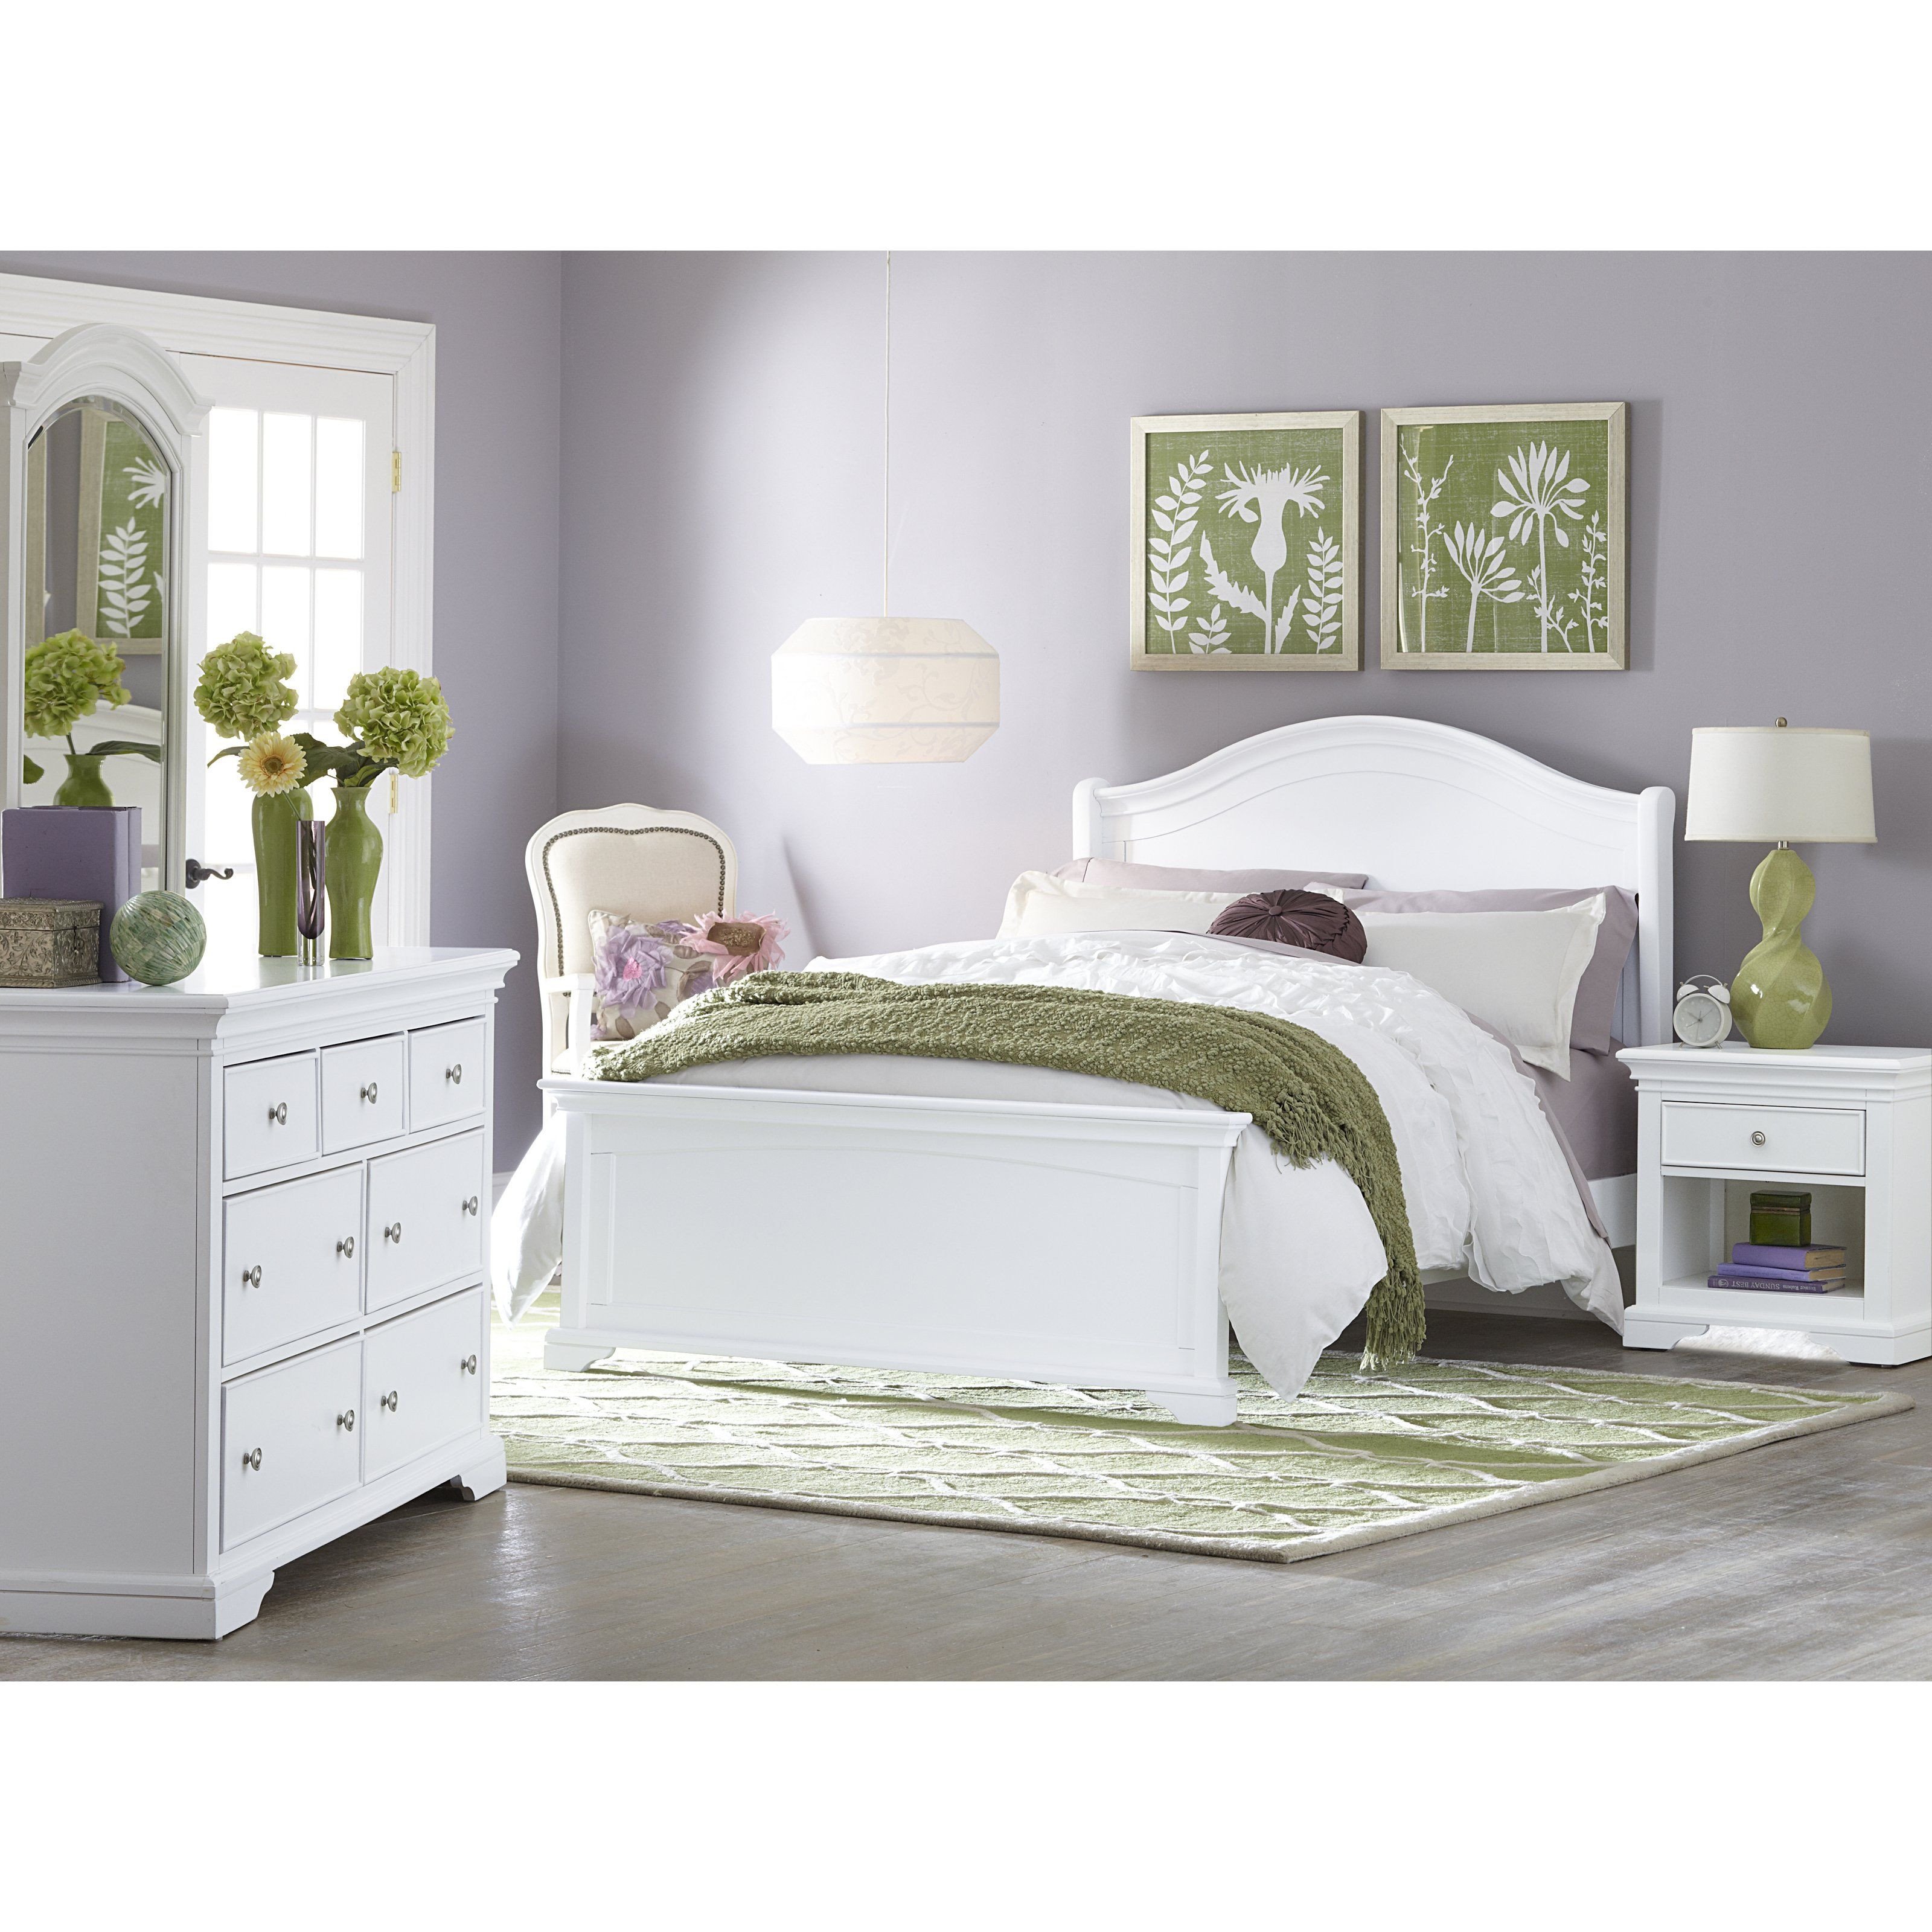 Girls White Bedroom Set Luxury Pin On Color Schemes &amp; Paint